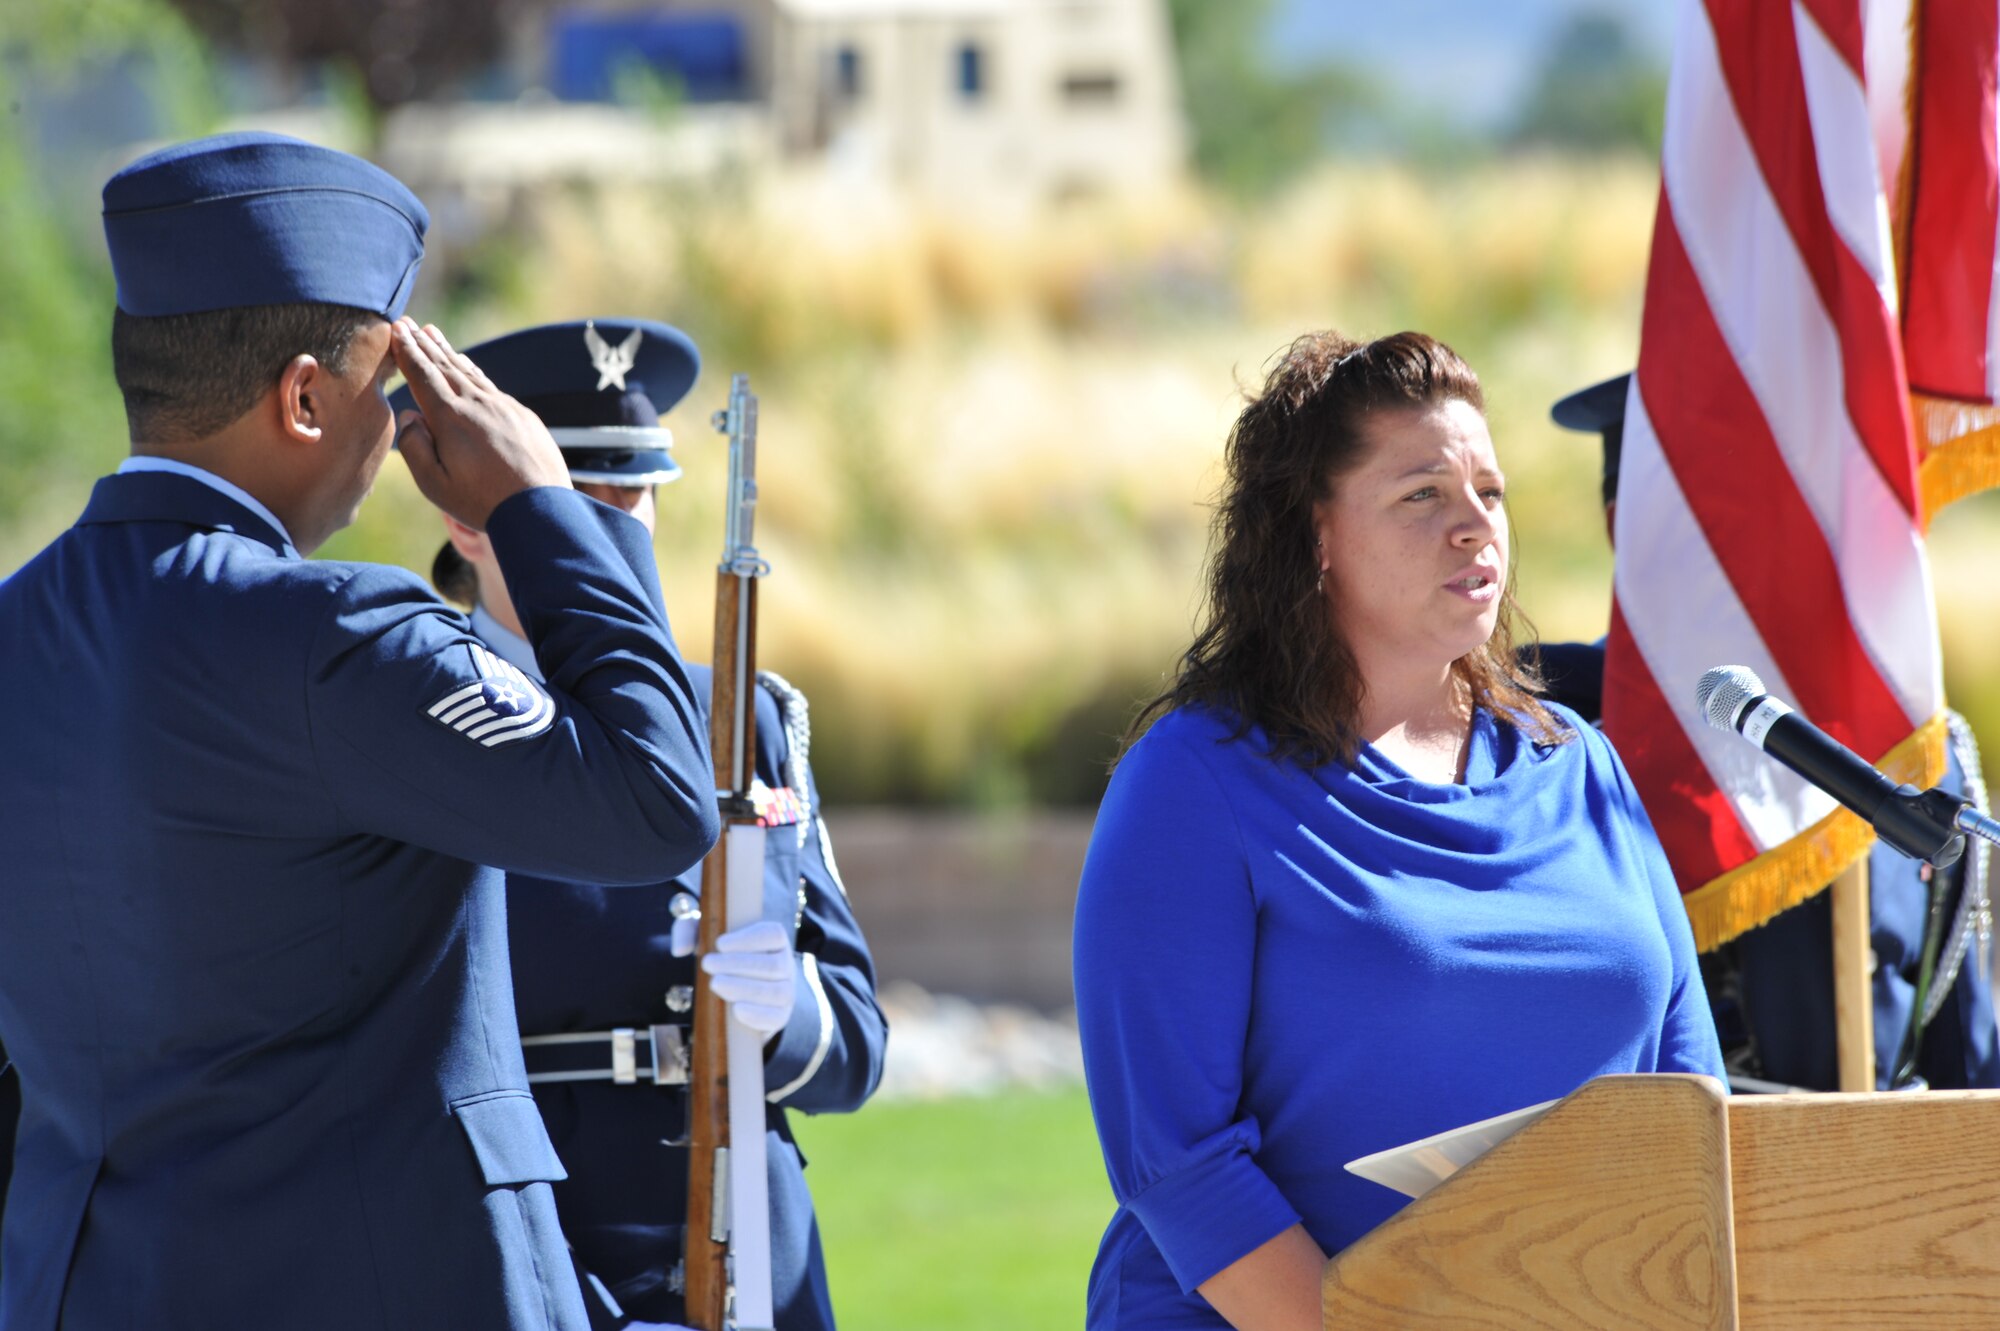 Robyn Tarin sings the national anthem during the National POW/MIA Recognition Day ceremony Sept. 17 at the New Mexico Veterans Memorial.  U.S. Air Force Photo by Elizabeth Martinez